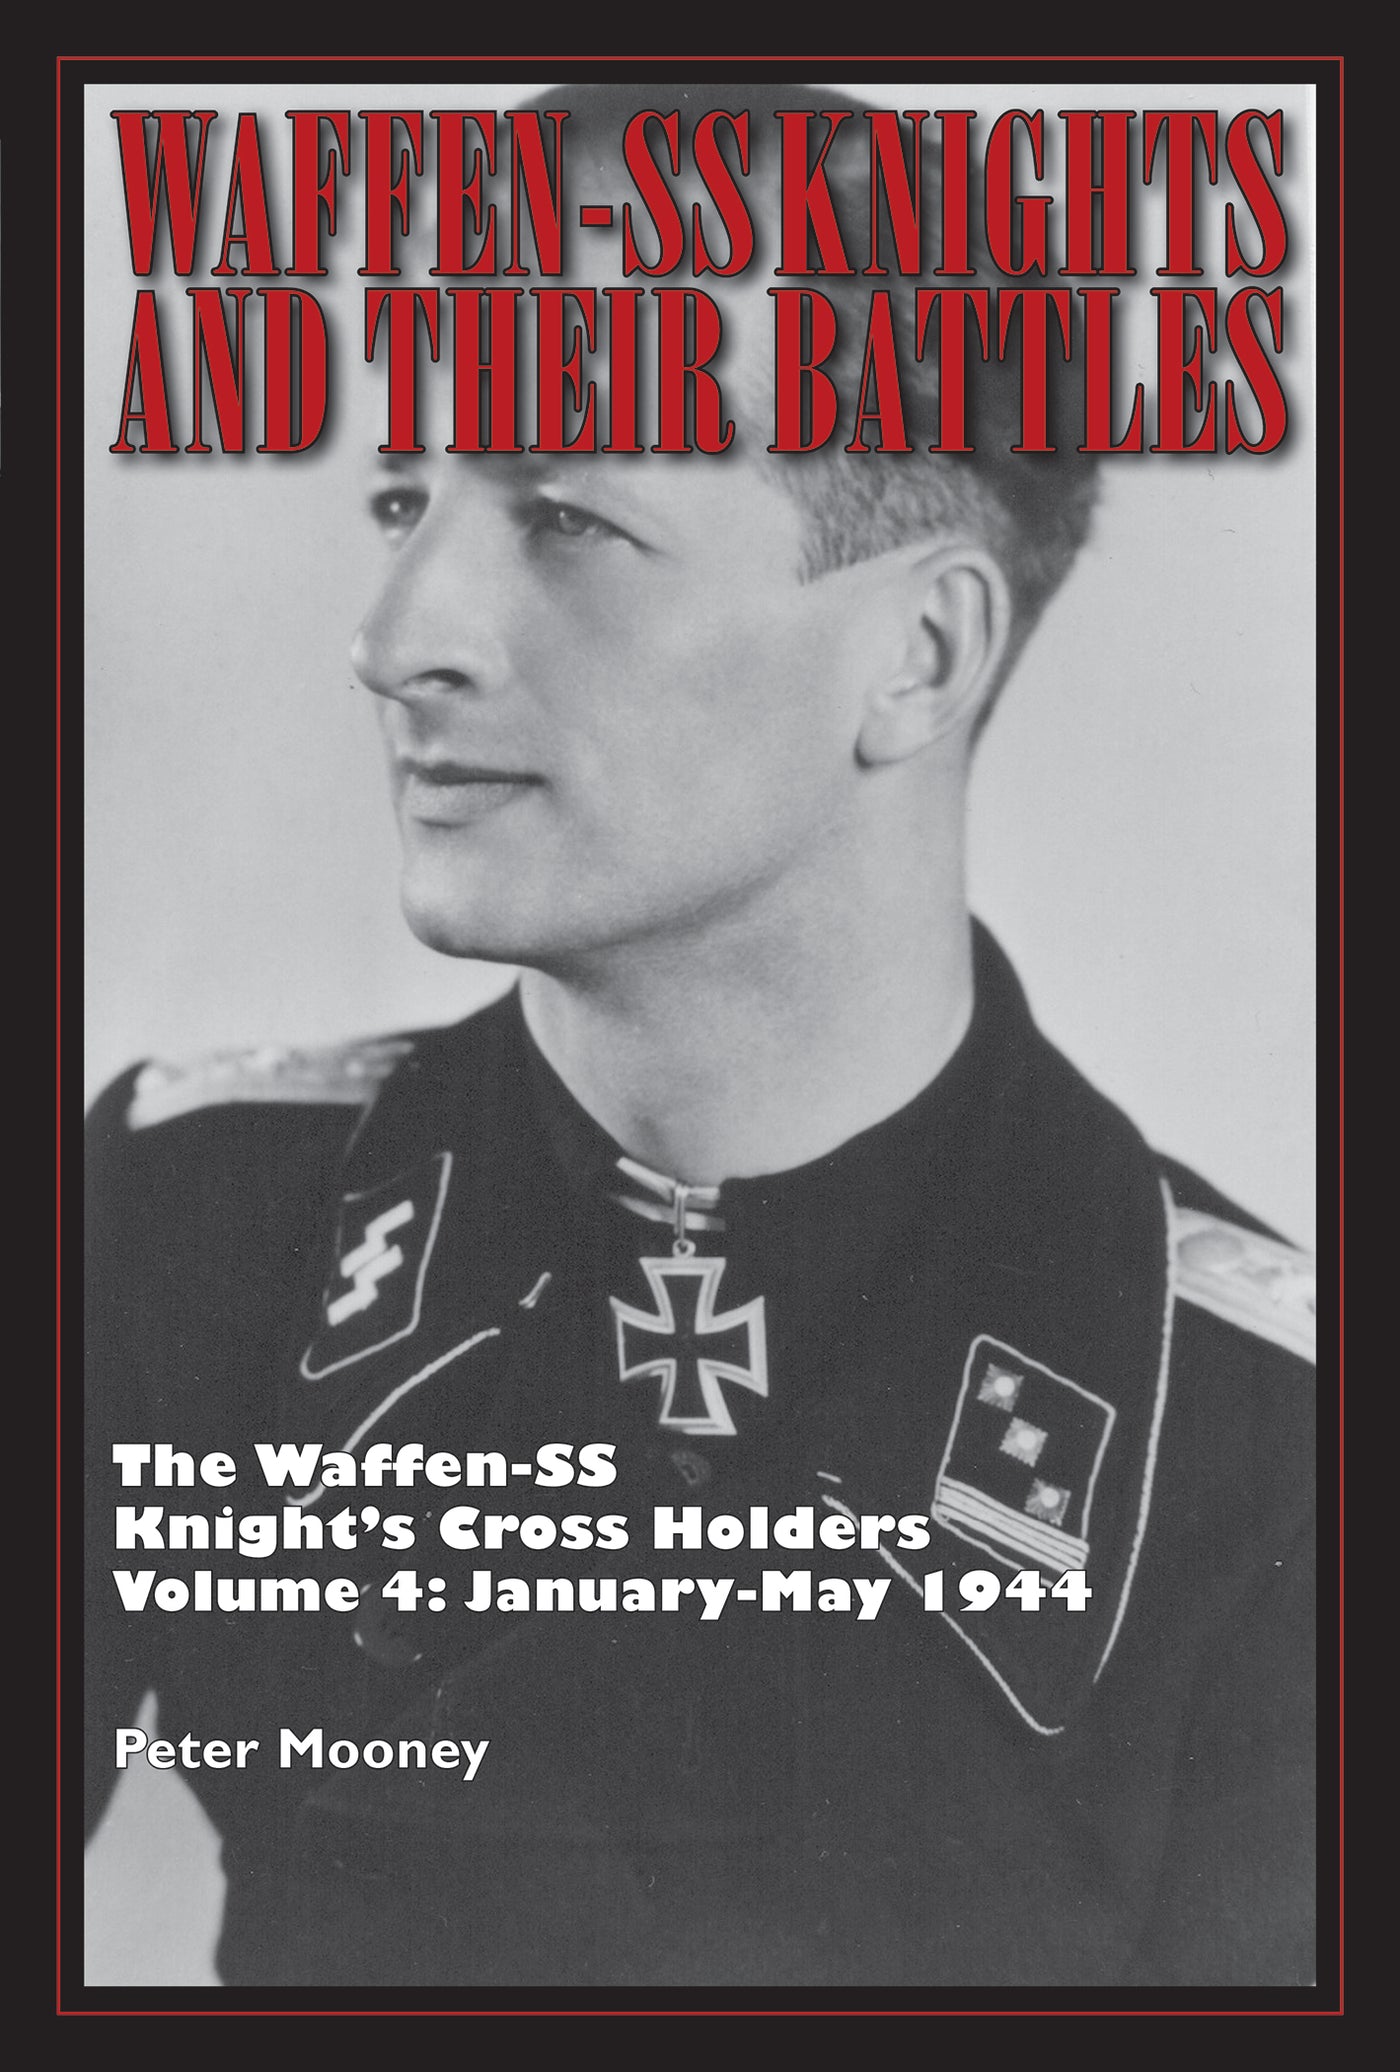 Waffen-SS Knights and Their Battles Vol. 4